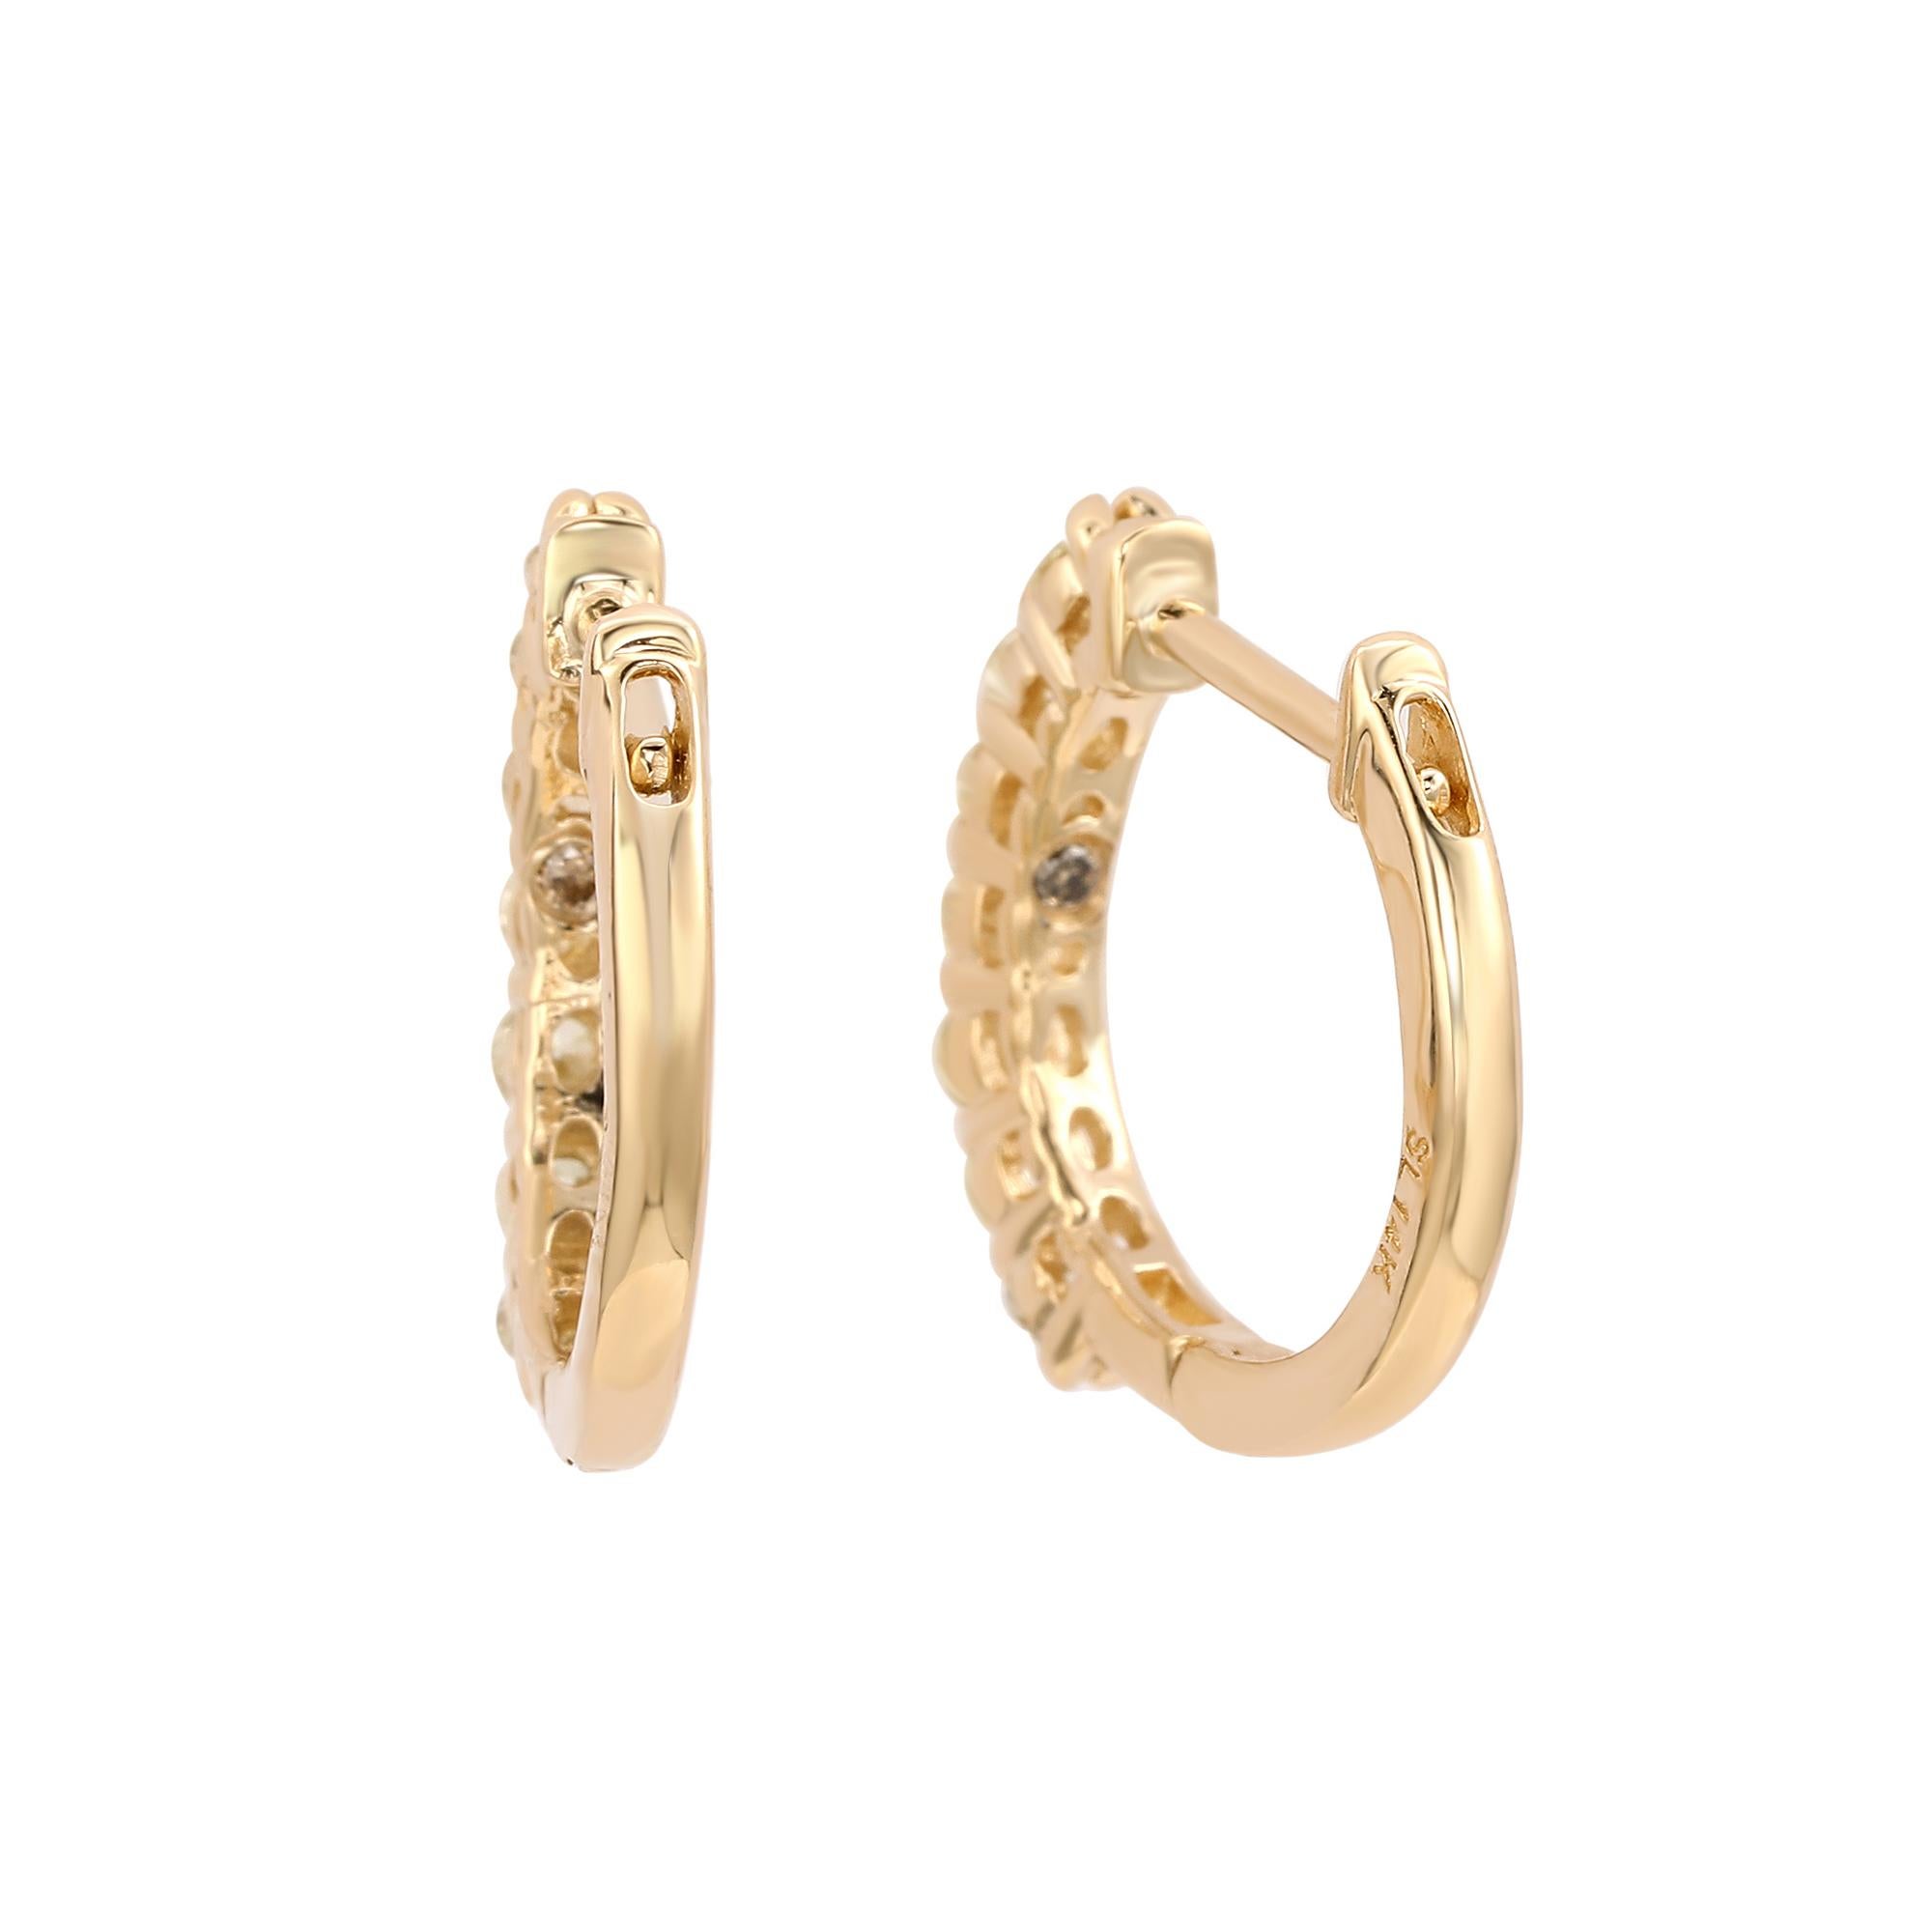 Make a statement with stunning huggie hoop earrings, perfect for women of all ages. These huggie hoop earrings feature a single row of round cut white diamonds set in 14k yellow gold. These hoops are crafted of sparkling diamonds going down the